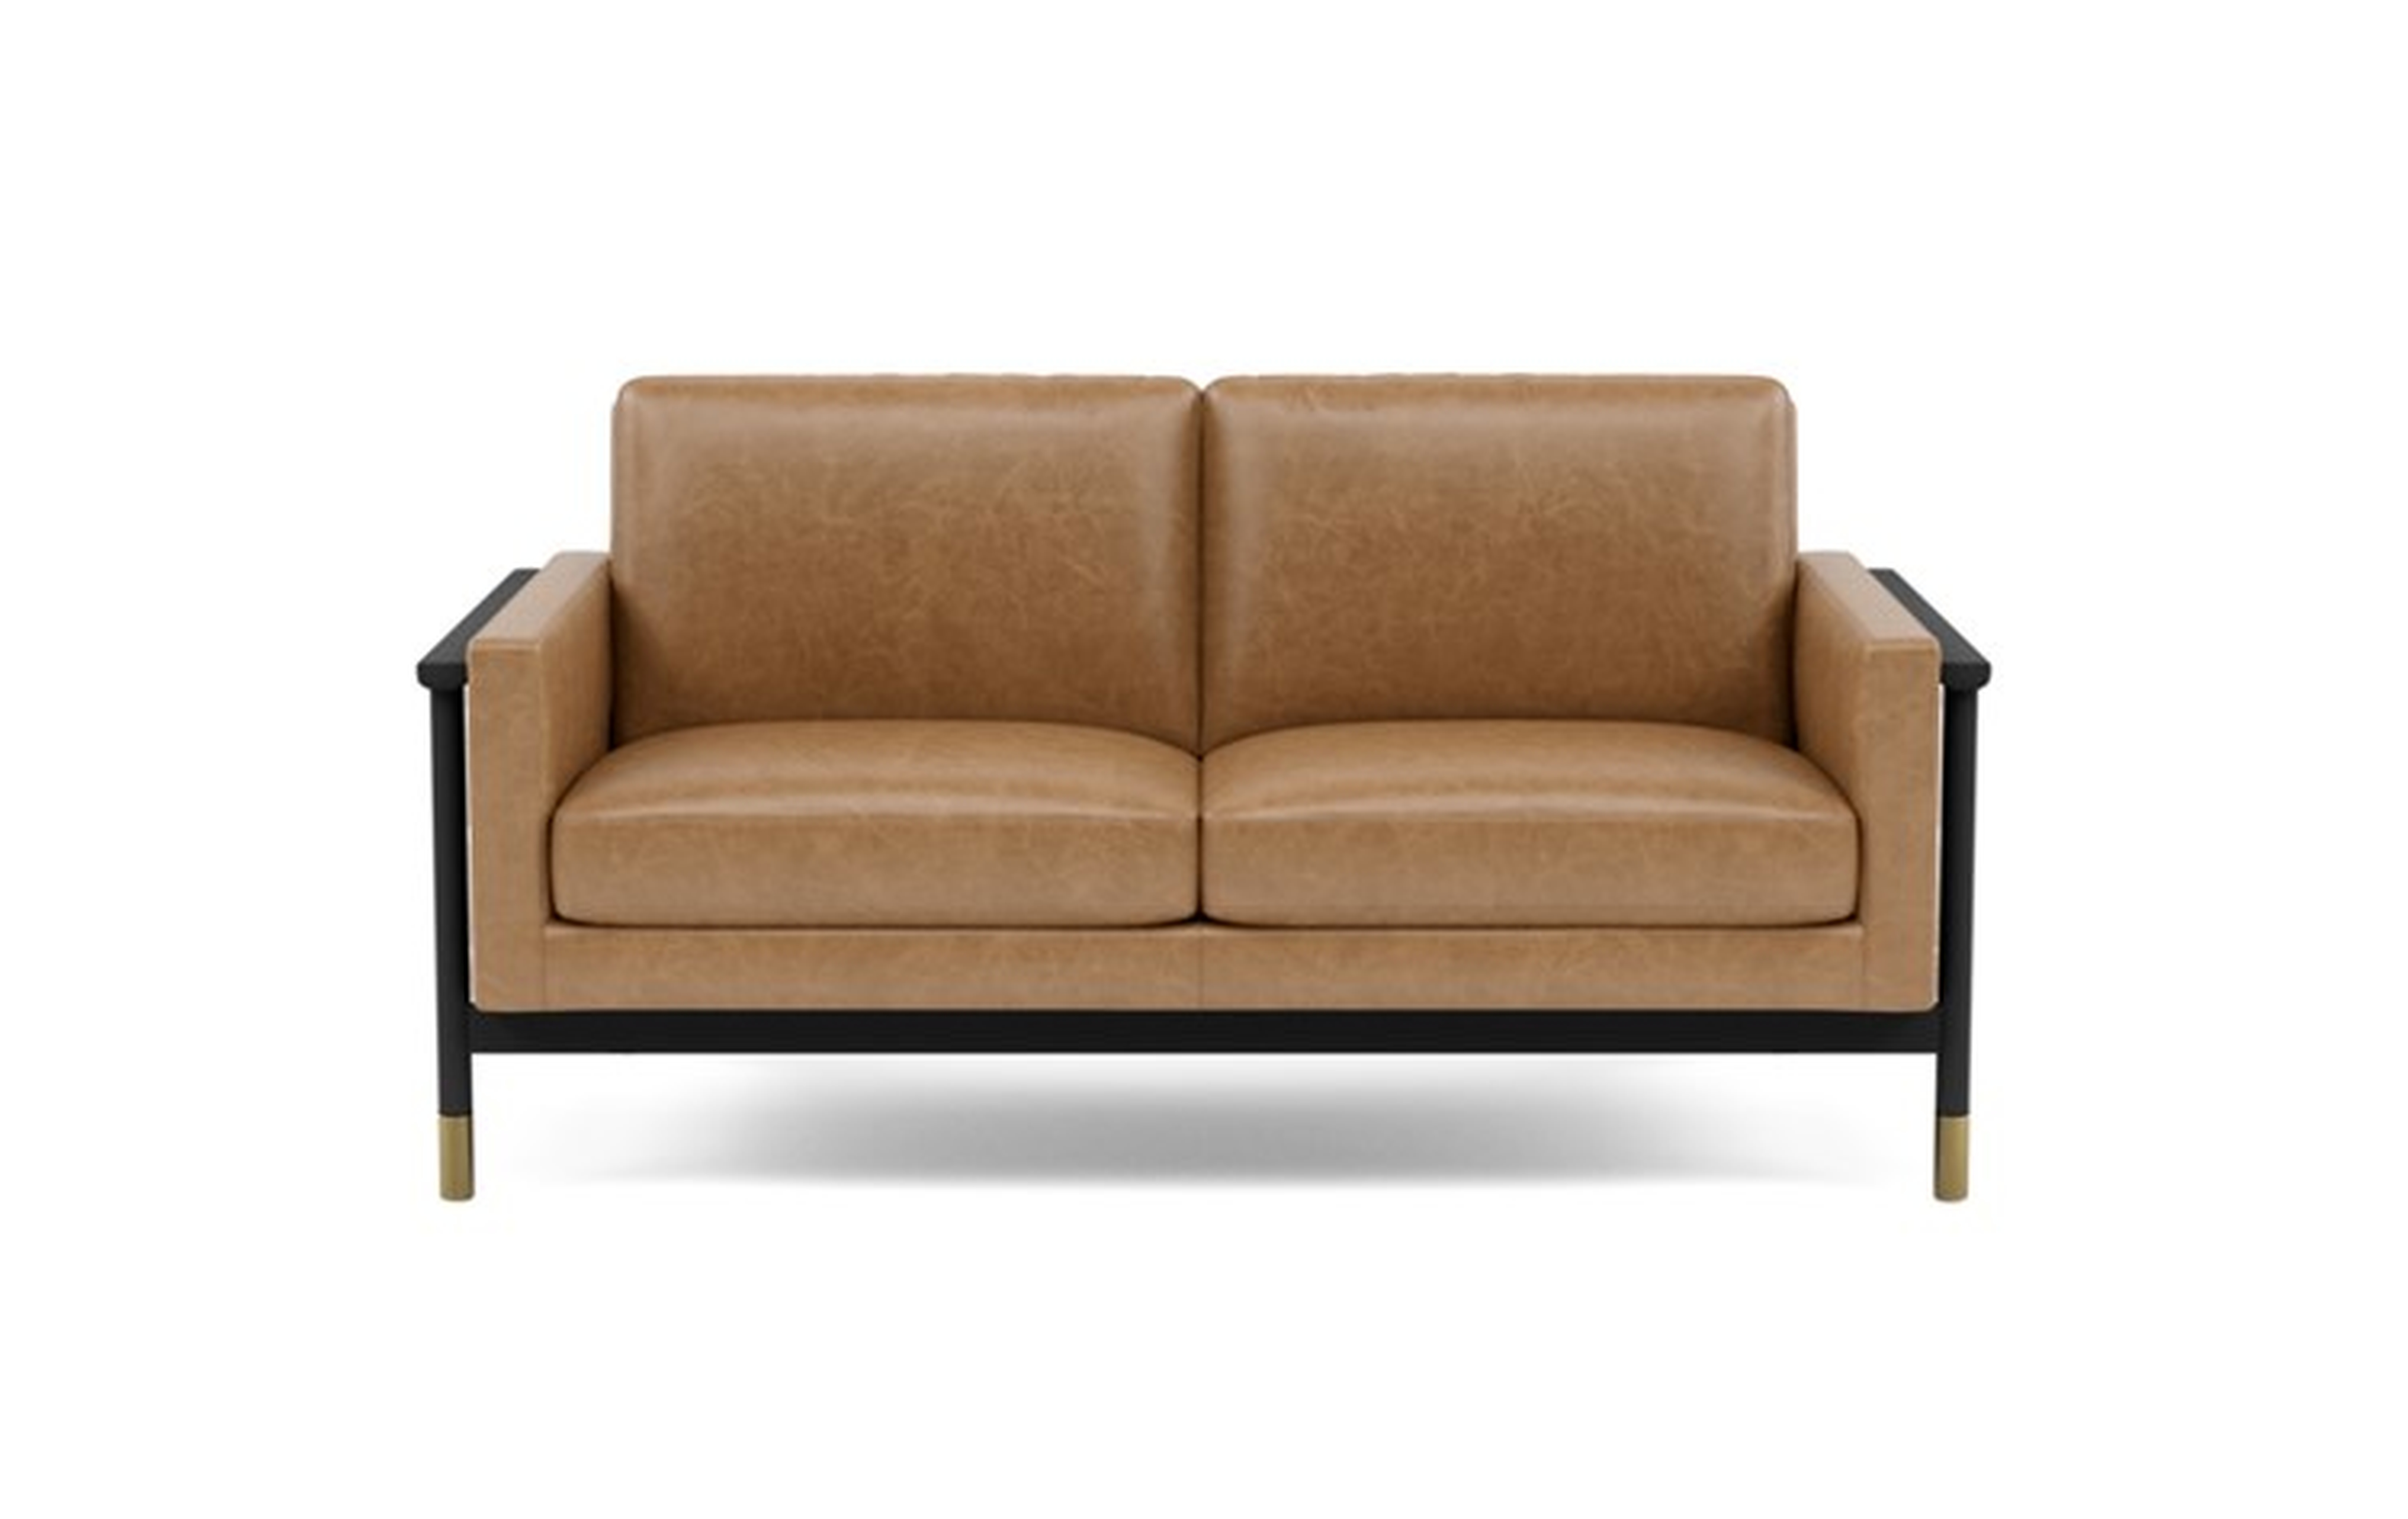 Jason Wu Leather Loveseats with Brown Palomino Leather and Matte Black with Brass Cap legs - Interior Define